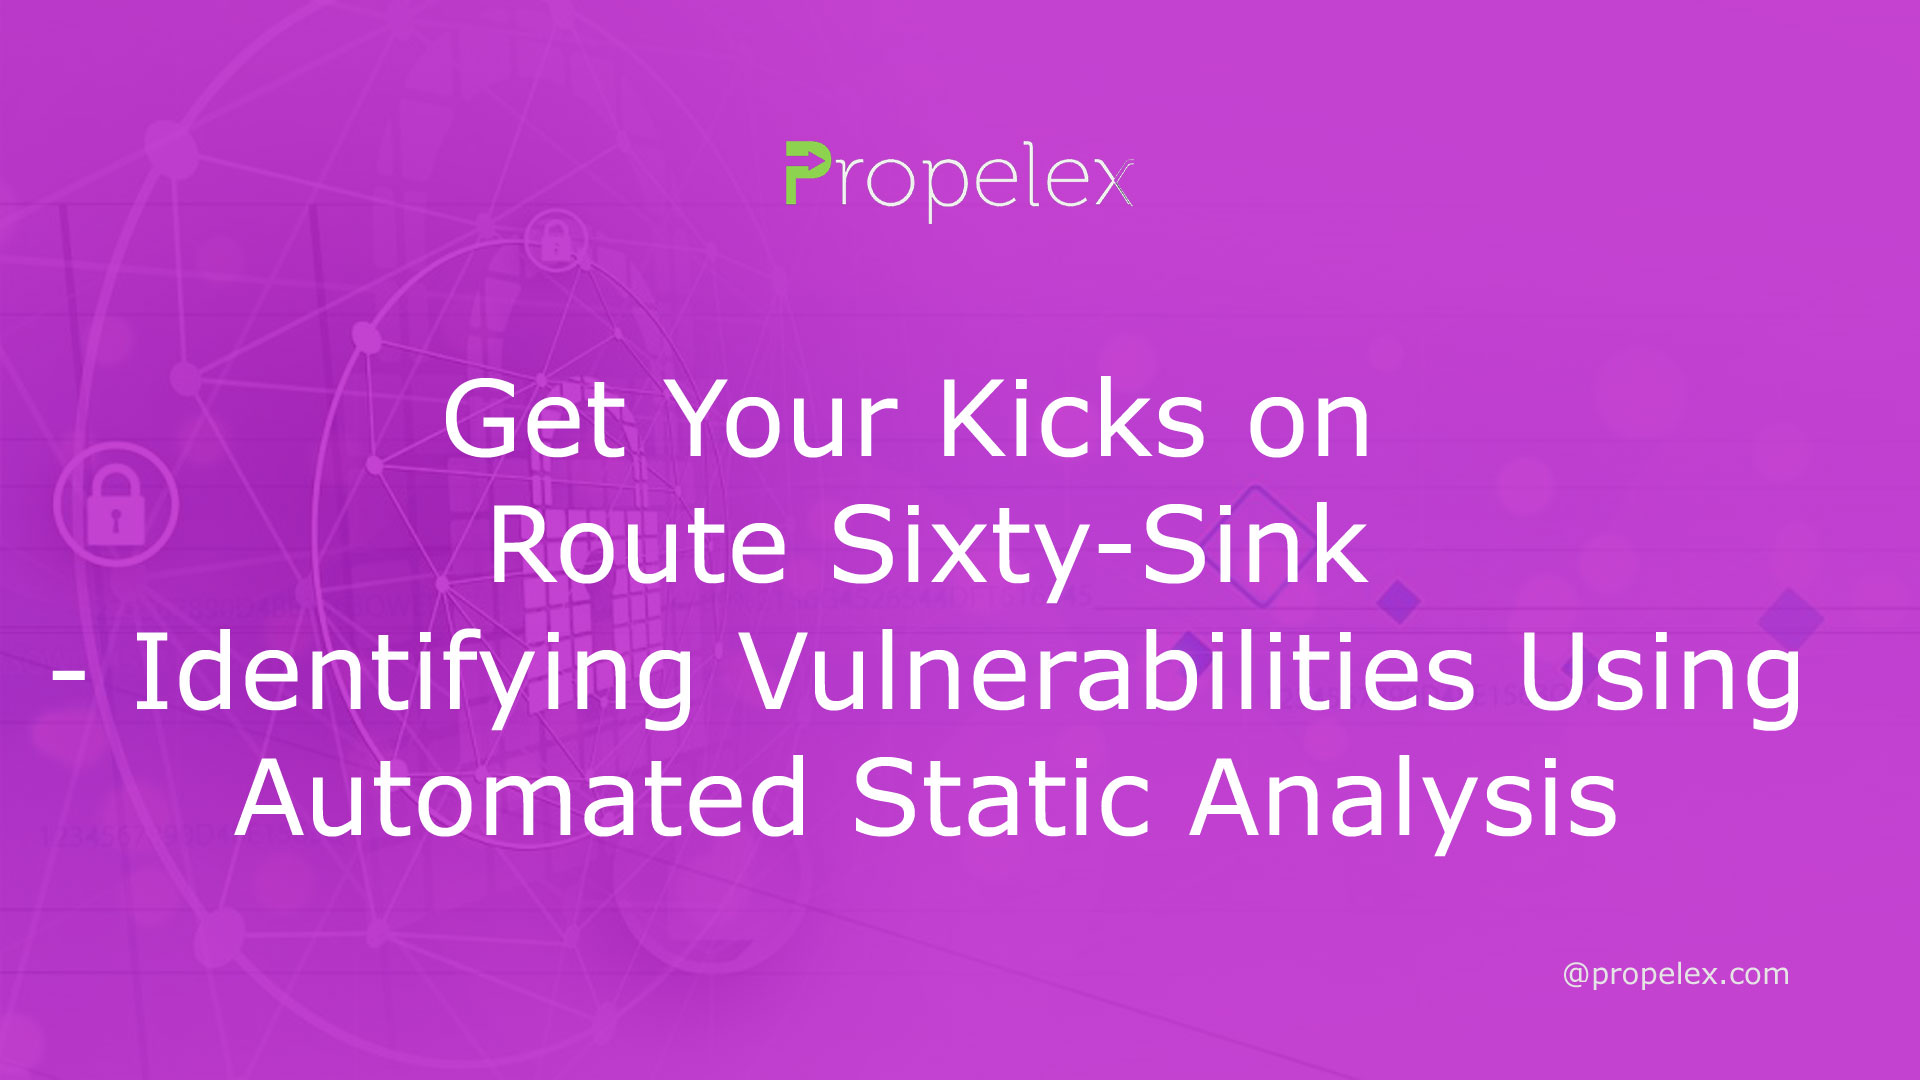 Get Your Kicks on Route Sixty-Sink - Identifying Vulnerabilities Using Automated Static Analysis